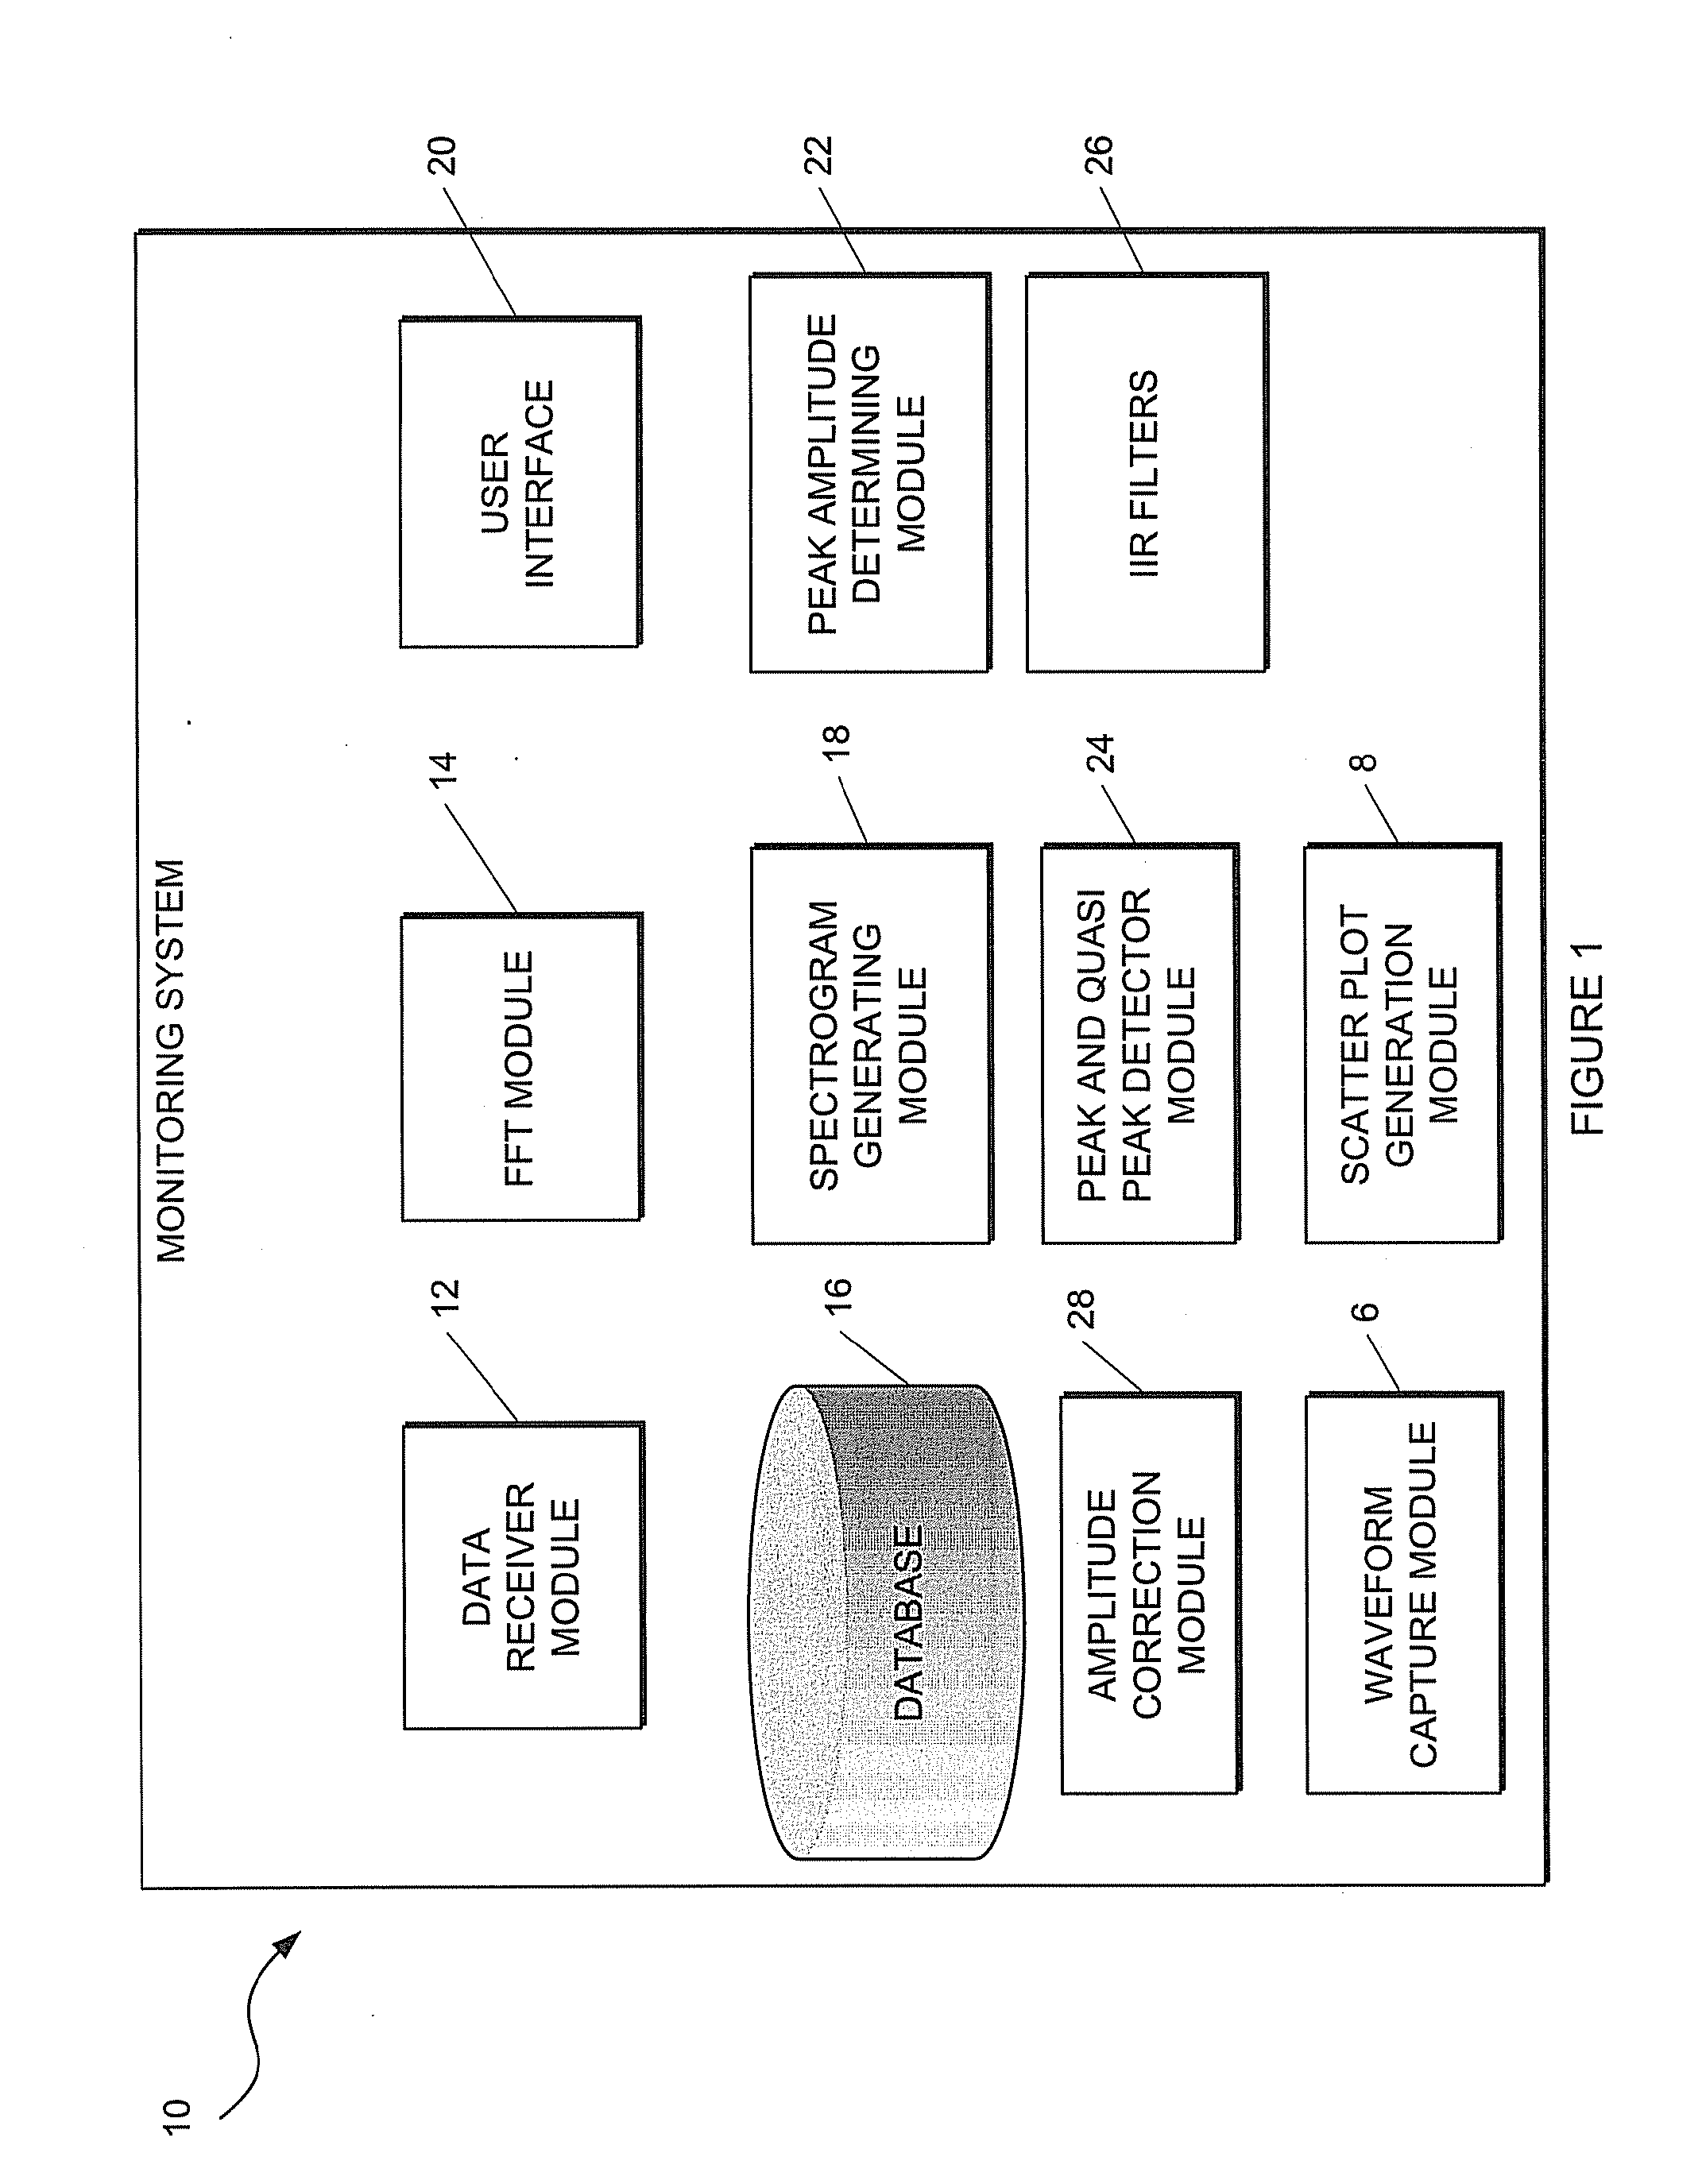 Time domain electromagnetic interference monitoring method and system